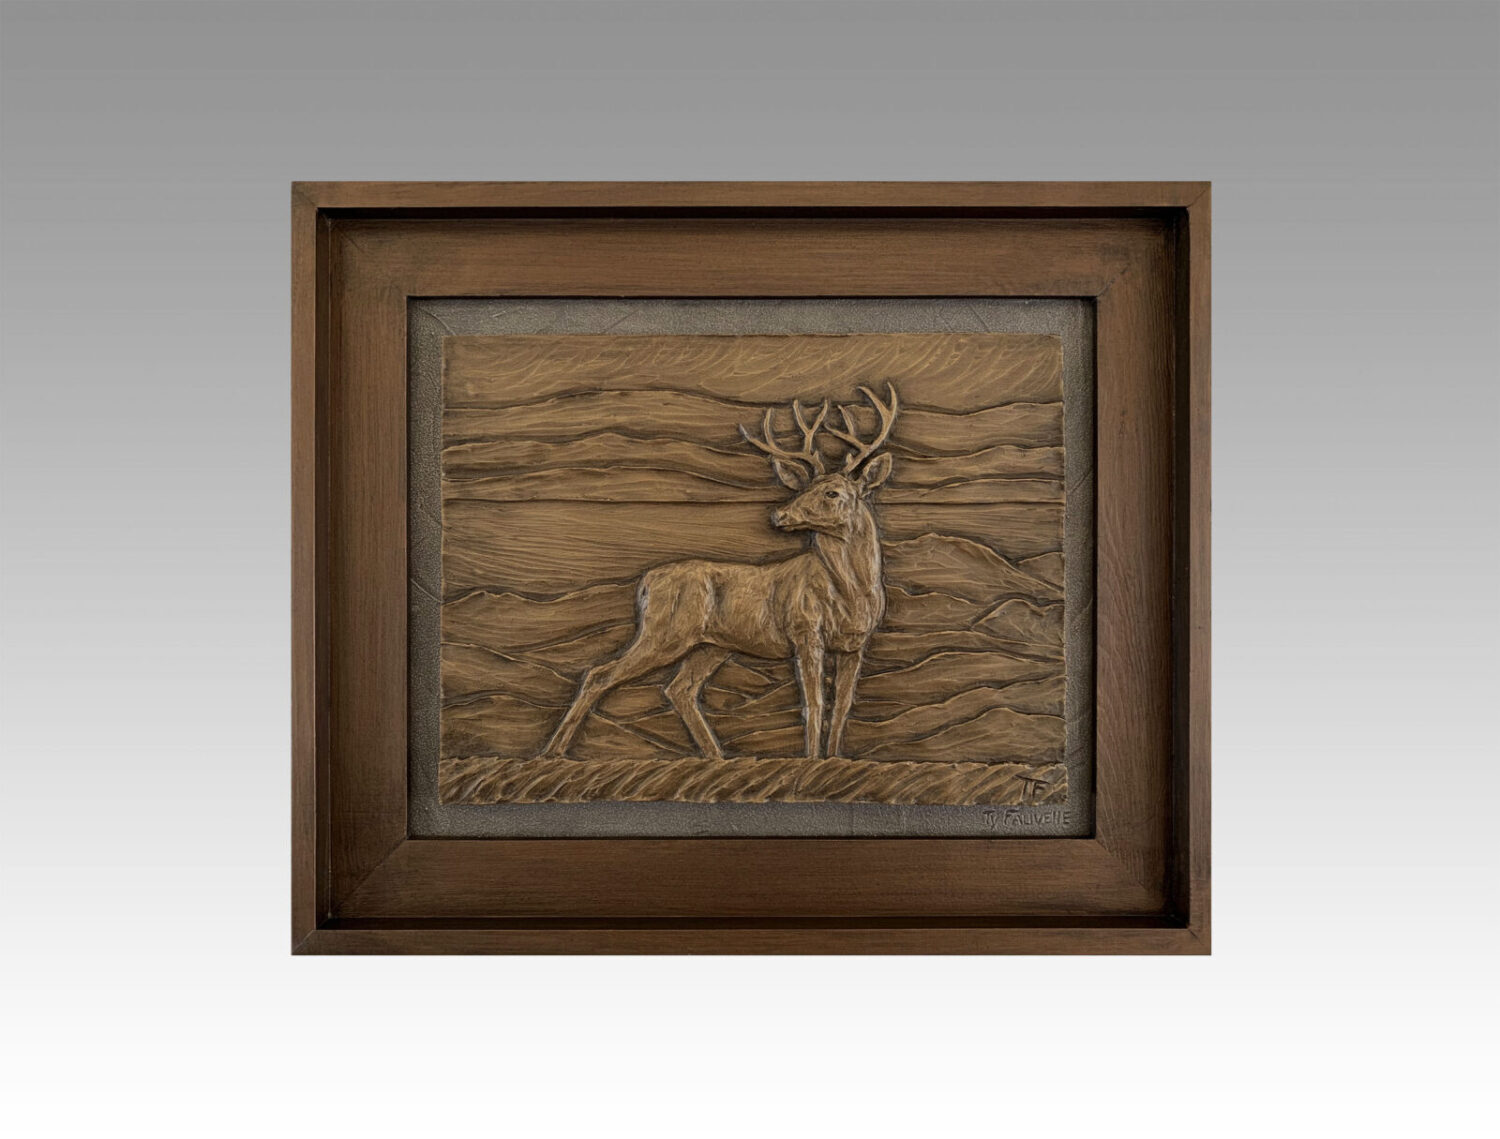 Gallery, Lookout Point, $325 CAD, Metal Infused, 17 ¼” x 14 ½” (framed), Edition 60, Sculptural Relief of a deer, Sculptor Tyler Fauvelle